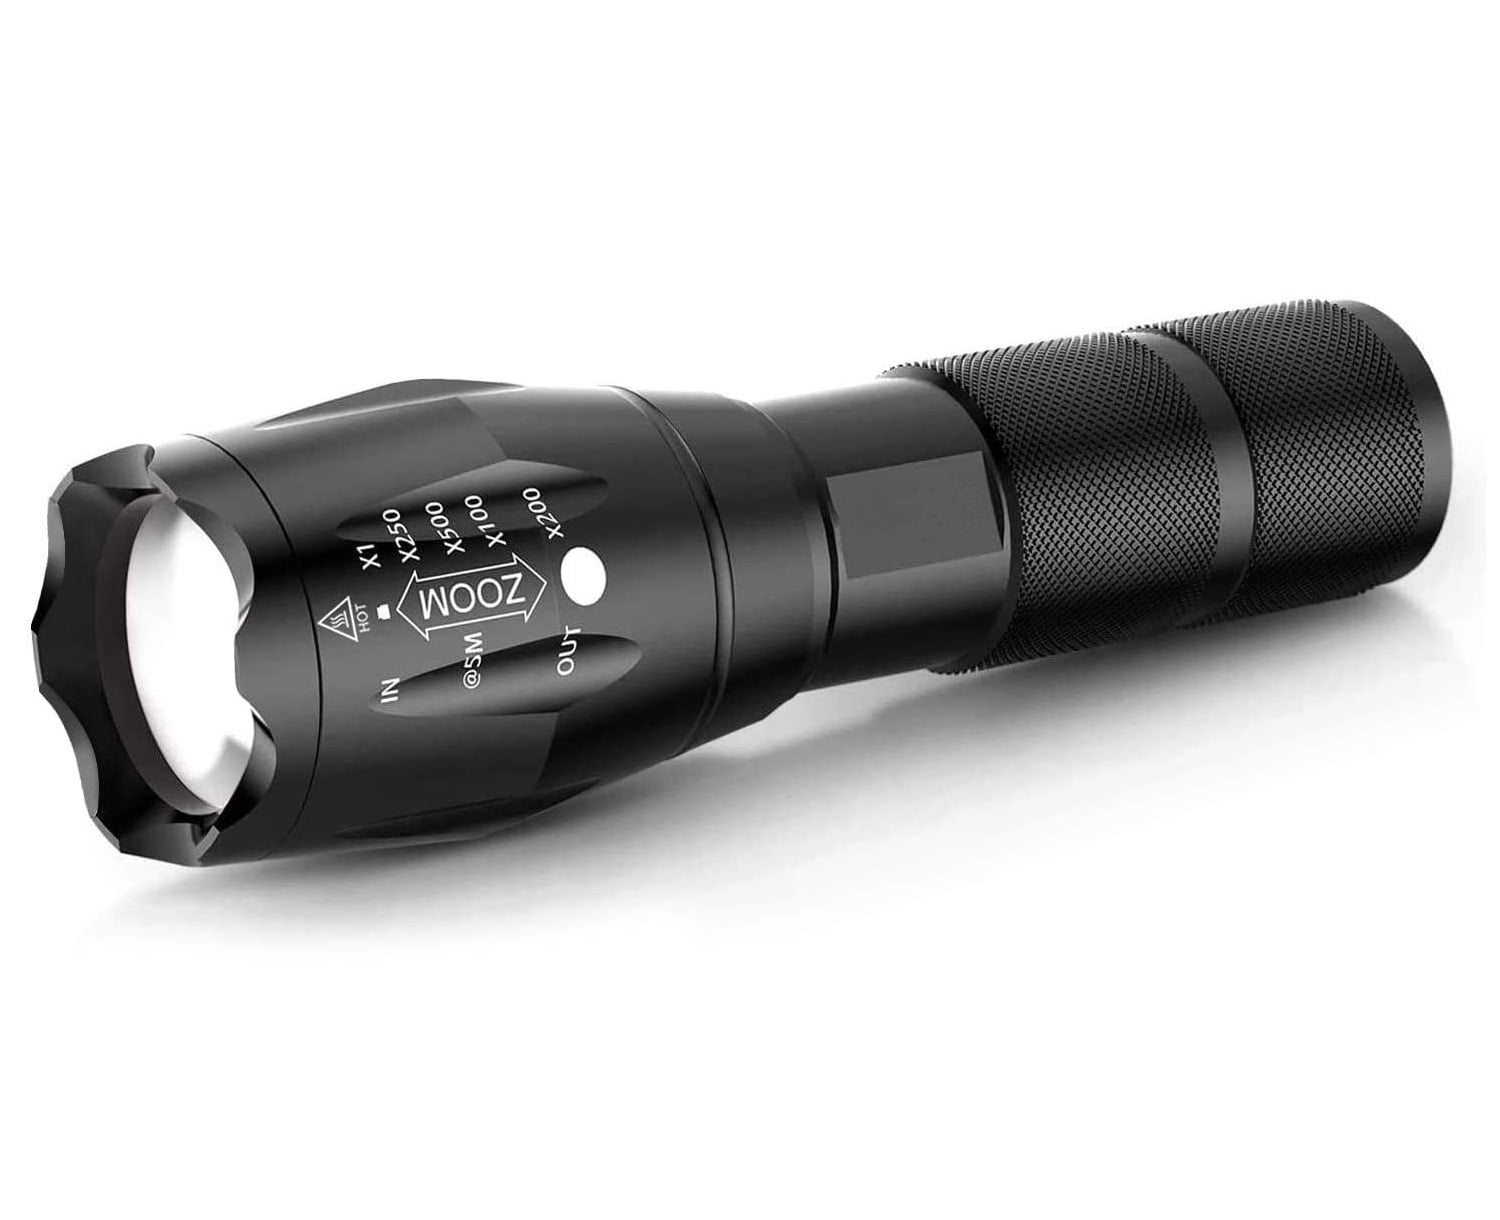 Ledeak T6 Upgrade L2 CREE,1200 Lumens LED Torch,5 Modes Zoomable Waterproof 